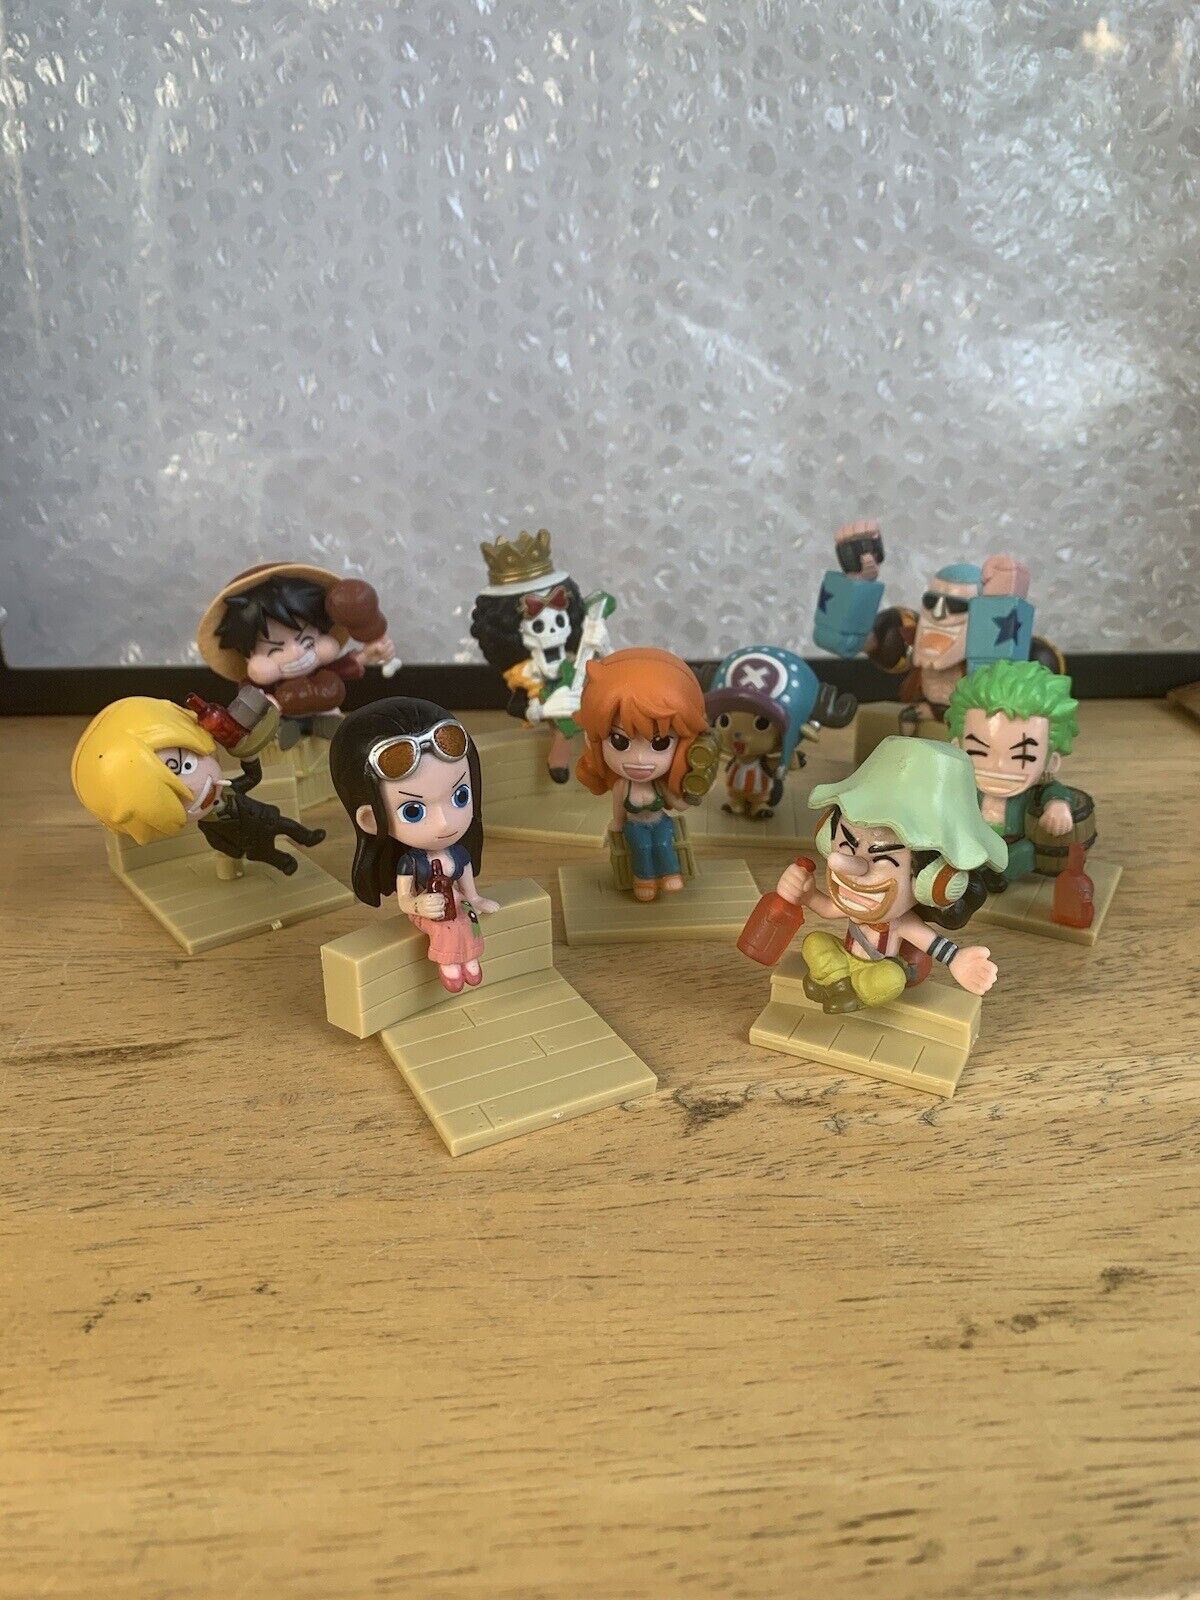 9 Pc. Cute Anime One Piece PVC Action Figure Collection Figurine Toys  2.5” Bx1